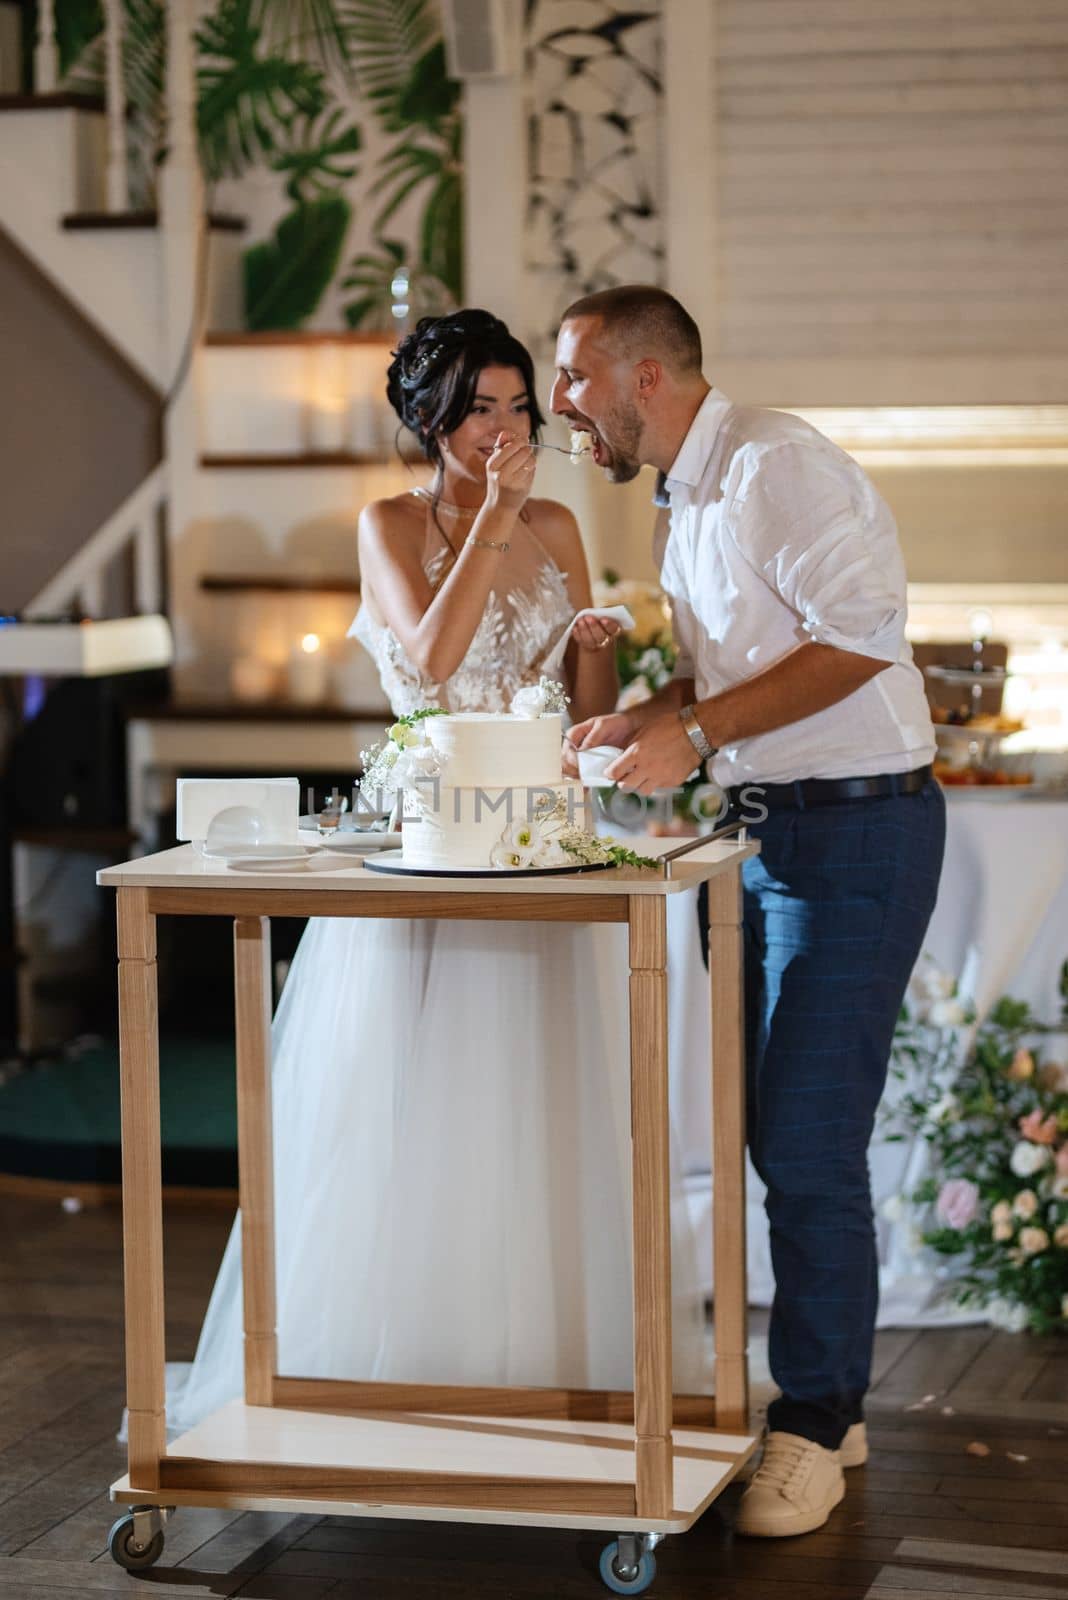 newlyweds happily cut and taste the wedding cake by Andreua